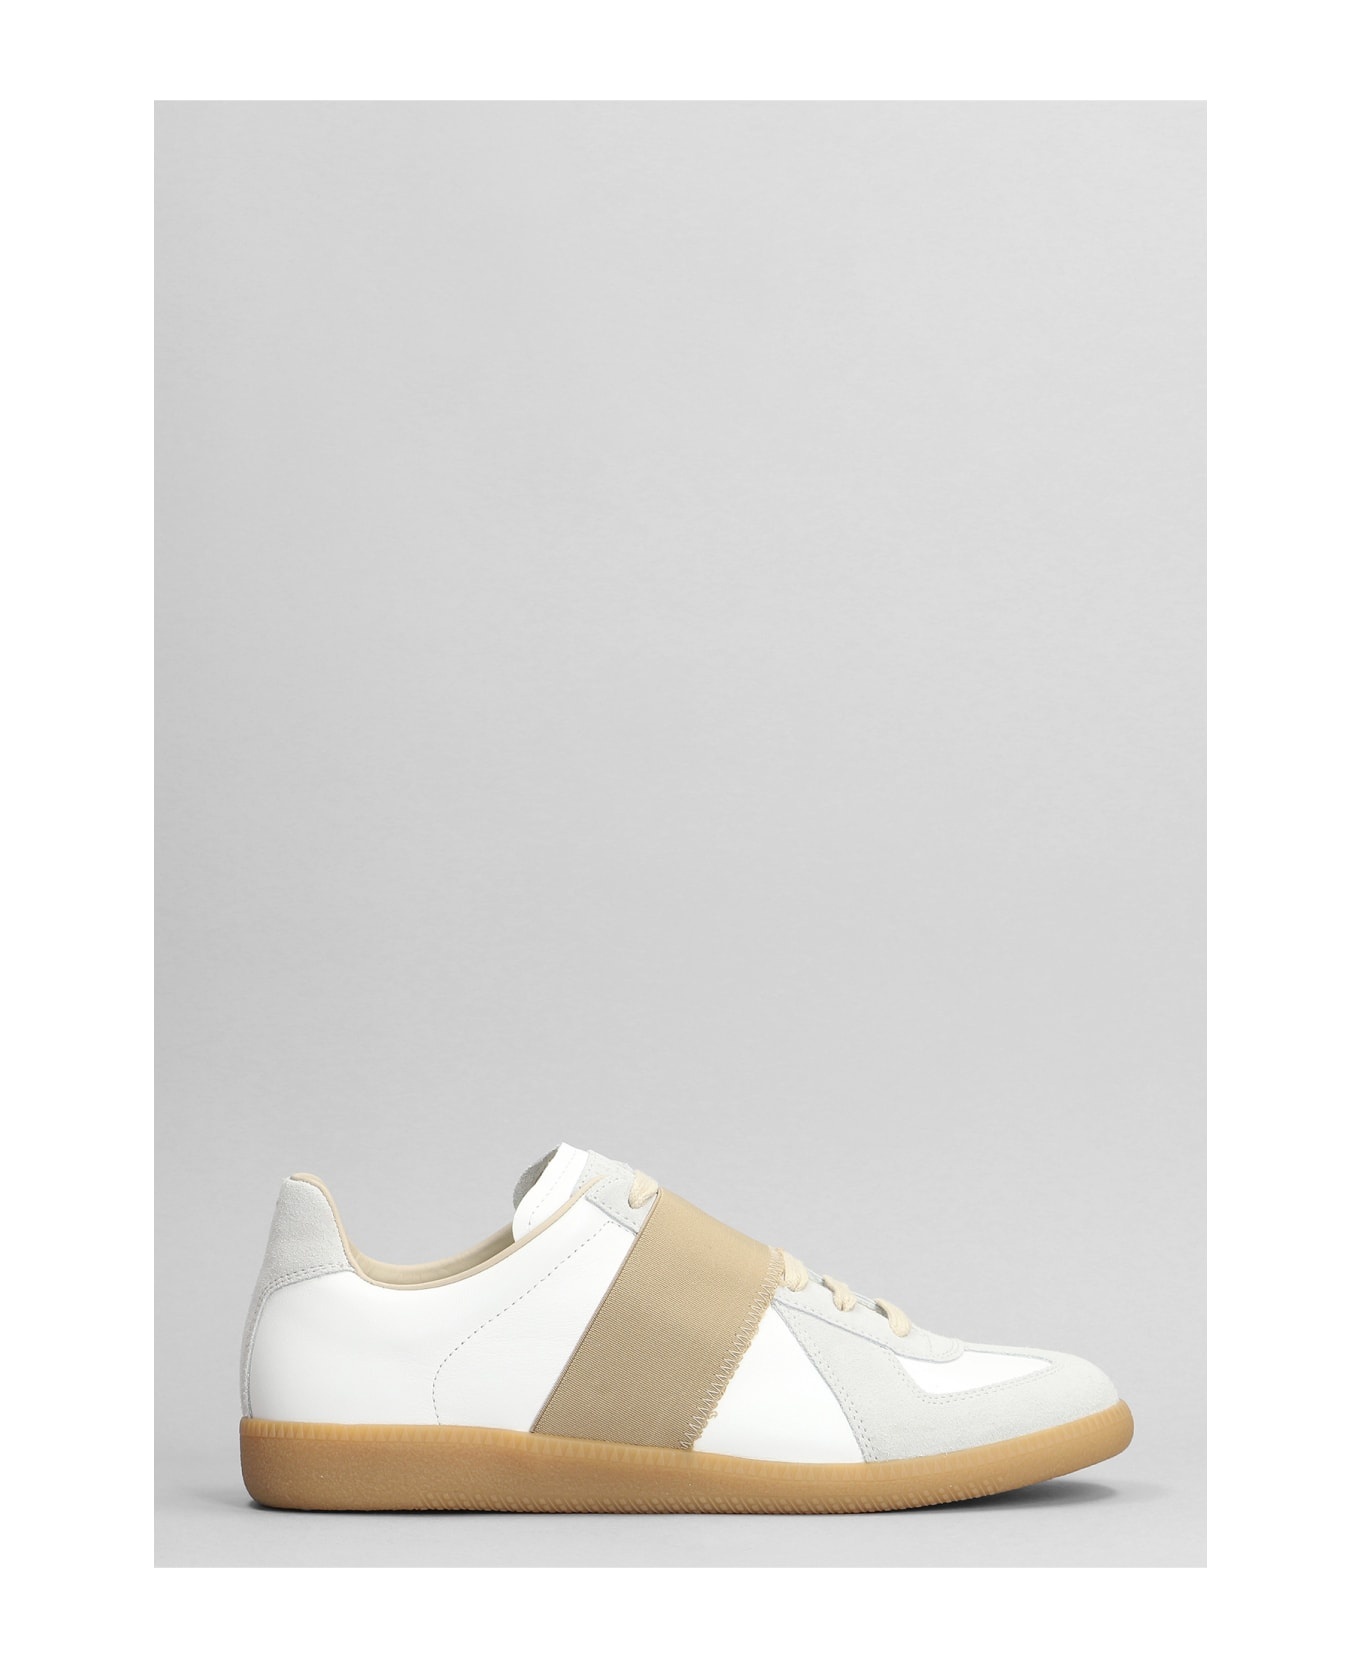 Replica Sneakers In White Suede And Leather - 1